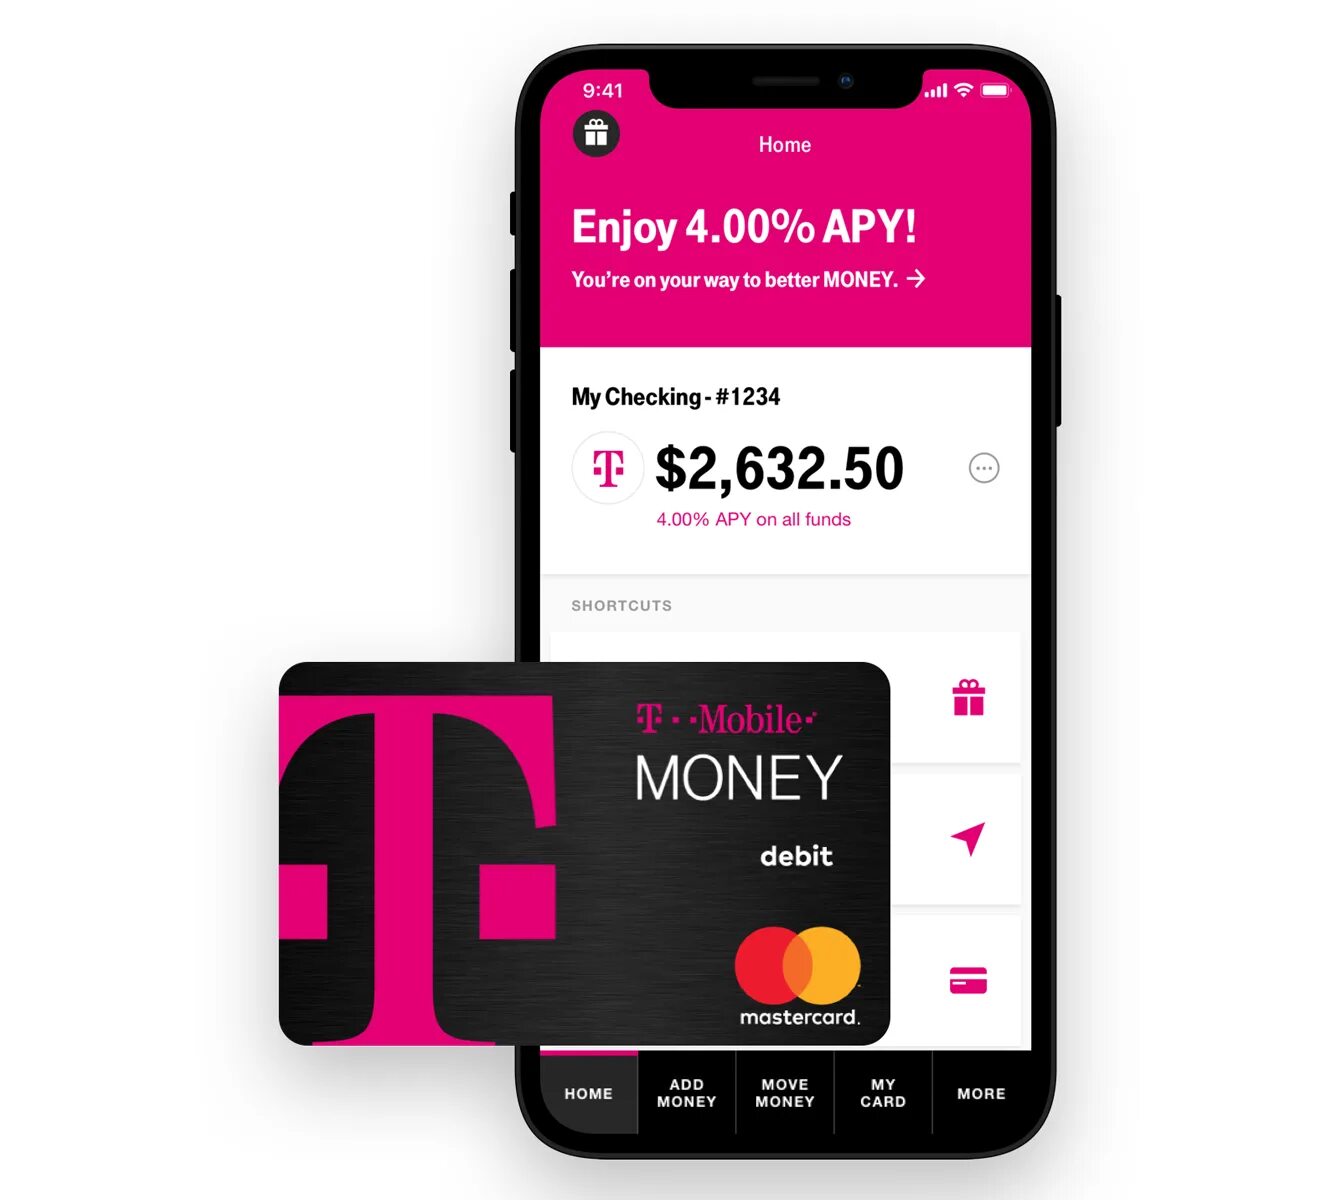 T mobile money. Т мобайл. T-mobile СПБ. Картинки t mobile. T mobile Chicago.